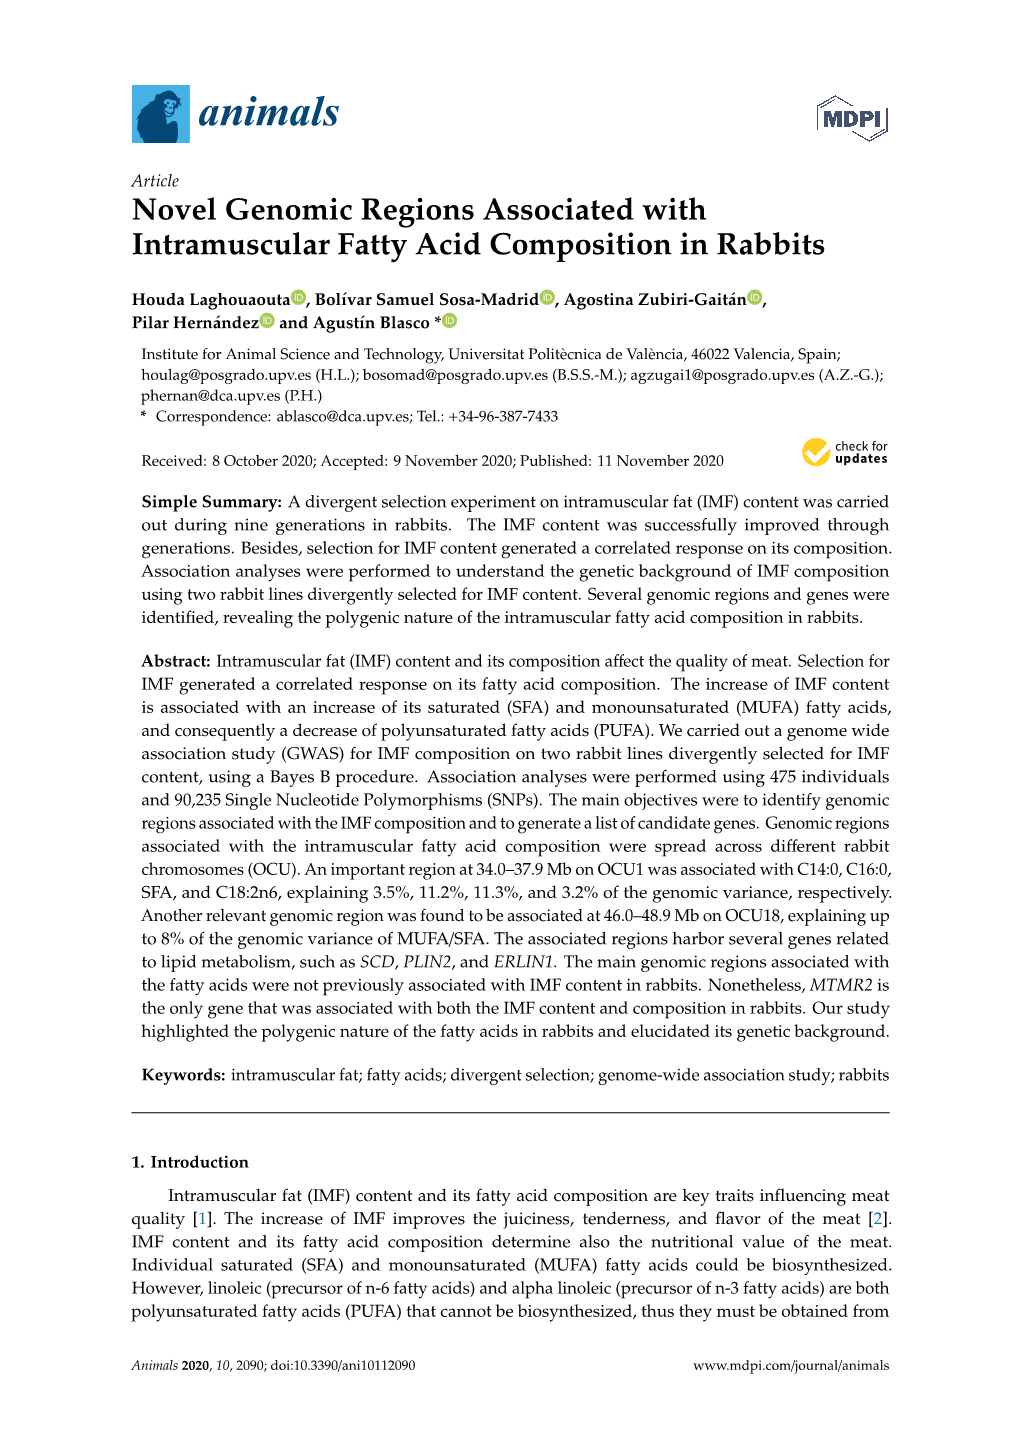 Novel Genomic Regions Associated with Intramuscular Fatty Acid Composition in Rabbits